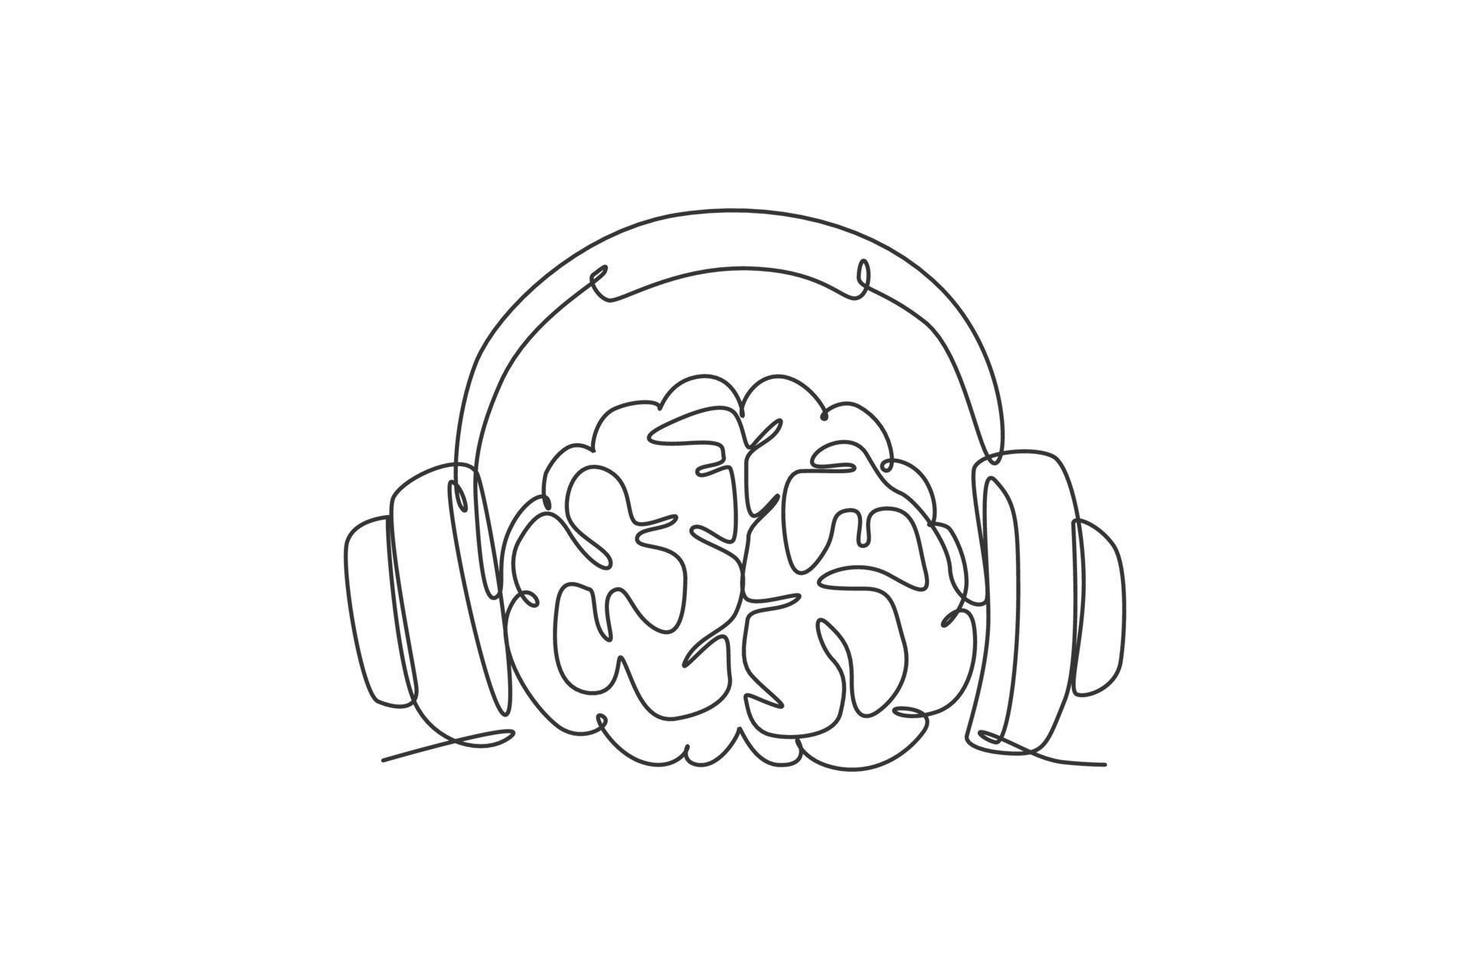 Single continuous line drawing of human brain listening music beat for musical company logo label. Smart audio dj logotype icon concept. Modern one line draw graphic design vector illustration